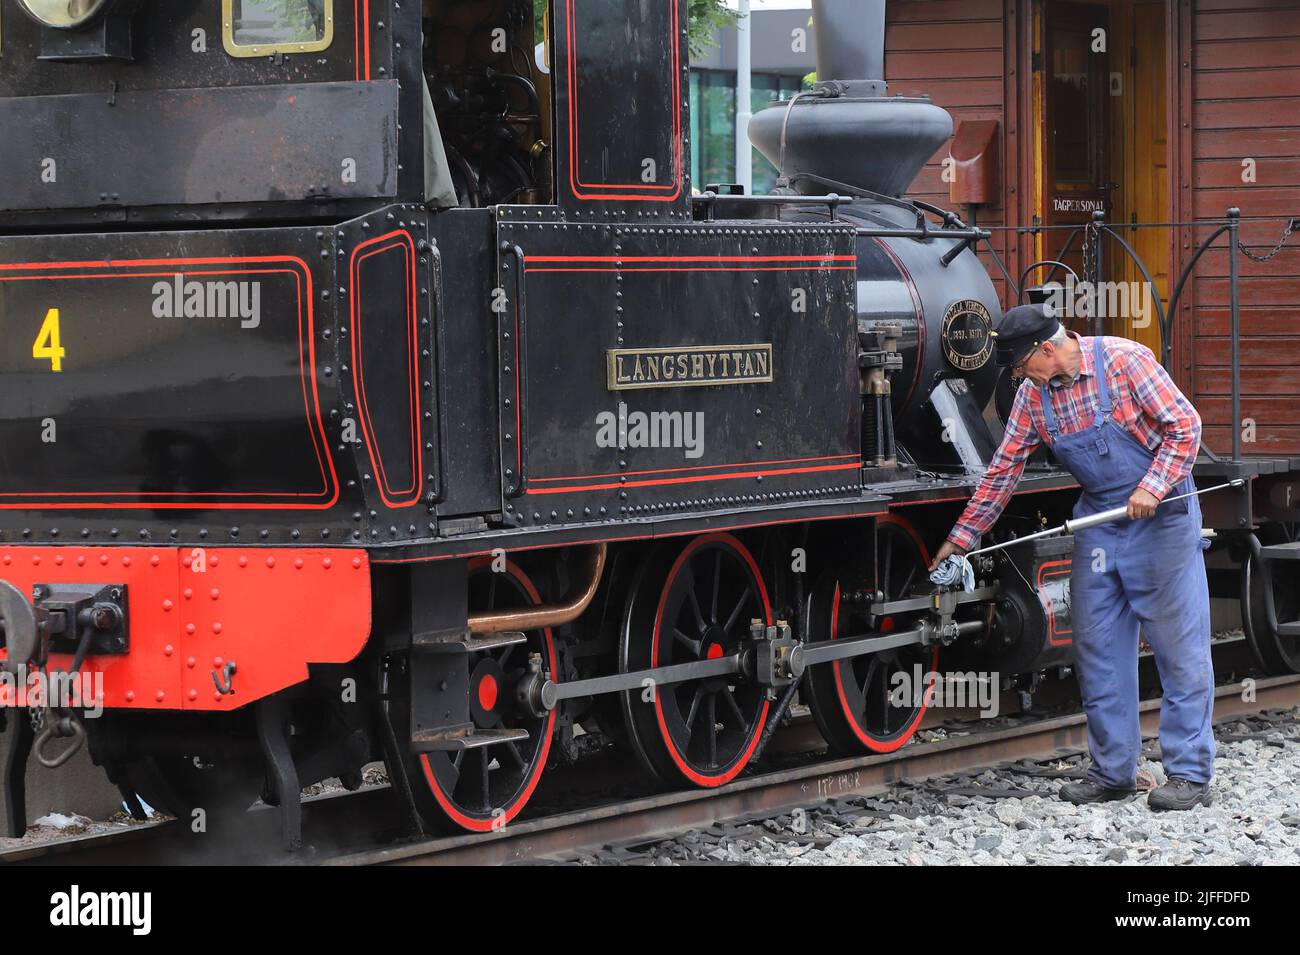 Uppsala, Sweden - July 2, 2022: A narrow-gauge old steam locomotive in museum traffic is lubricated by the railway staff at Uppsala Eastern station. Stock Photo